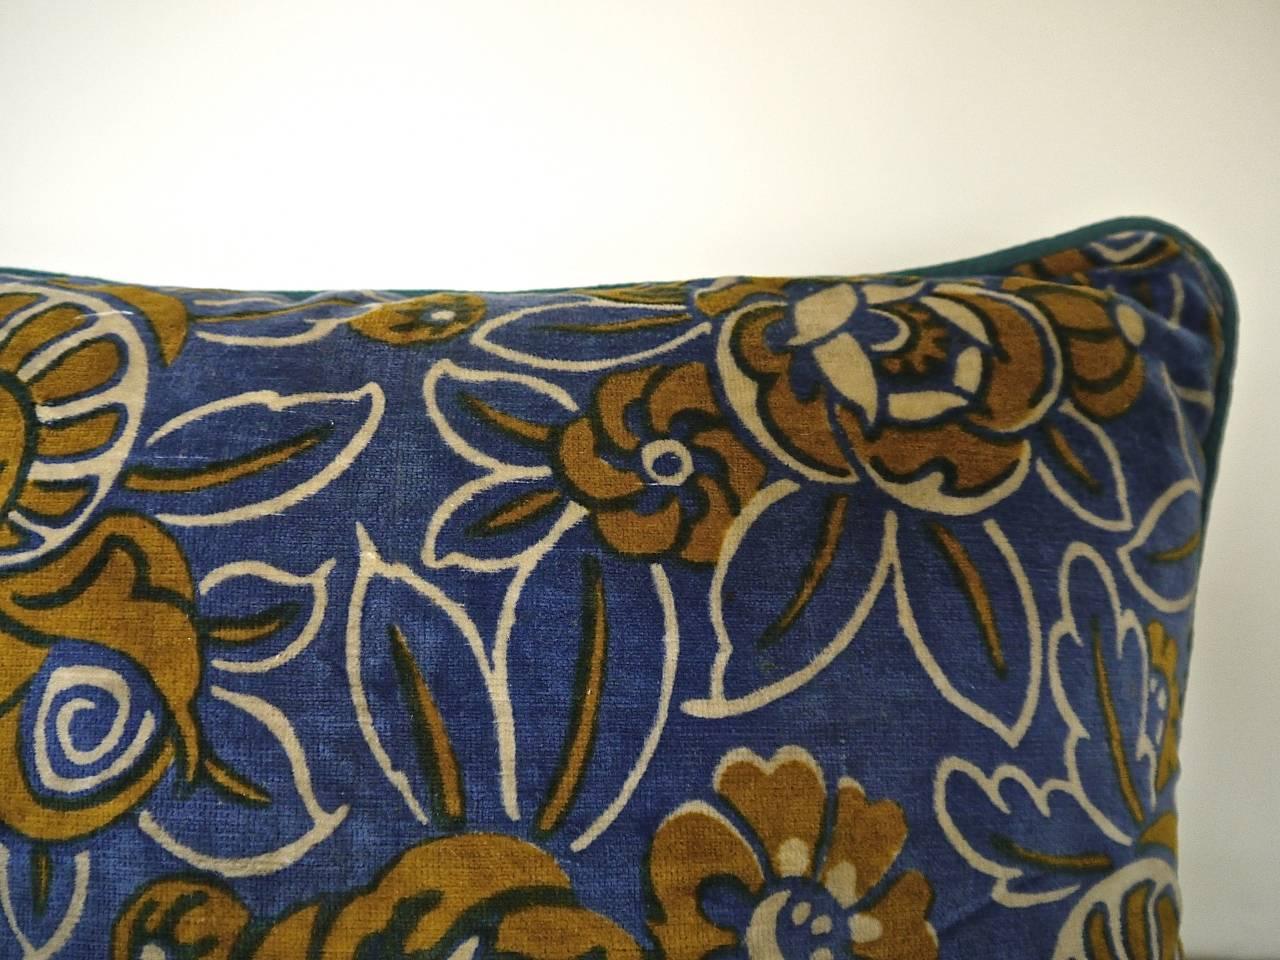 French 1920s Art Deco Tan and Blue Floral Velvet Cushion For Sale 2